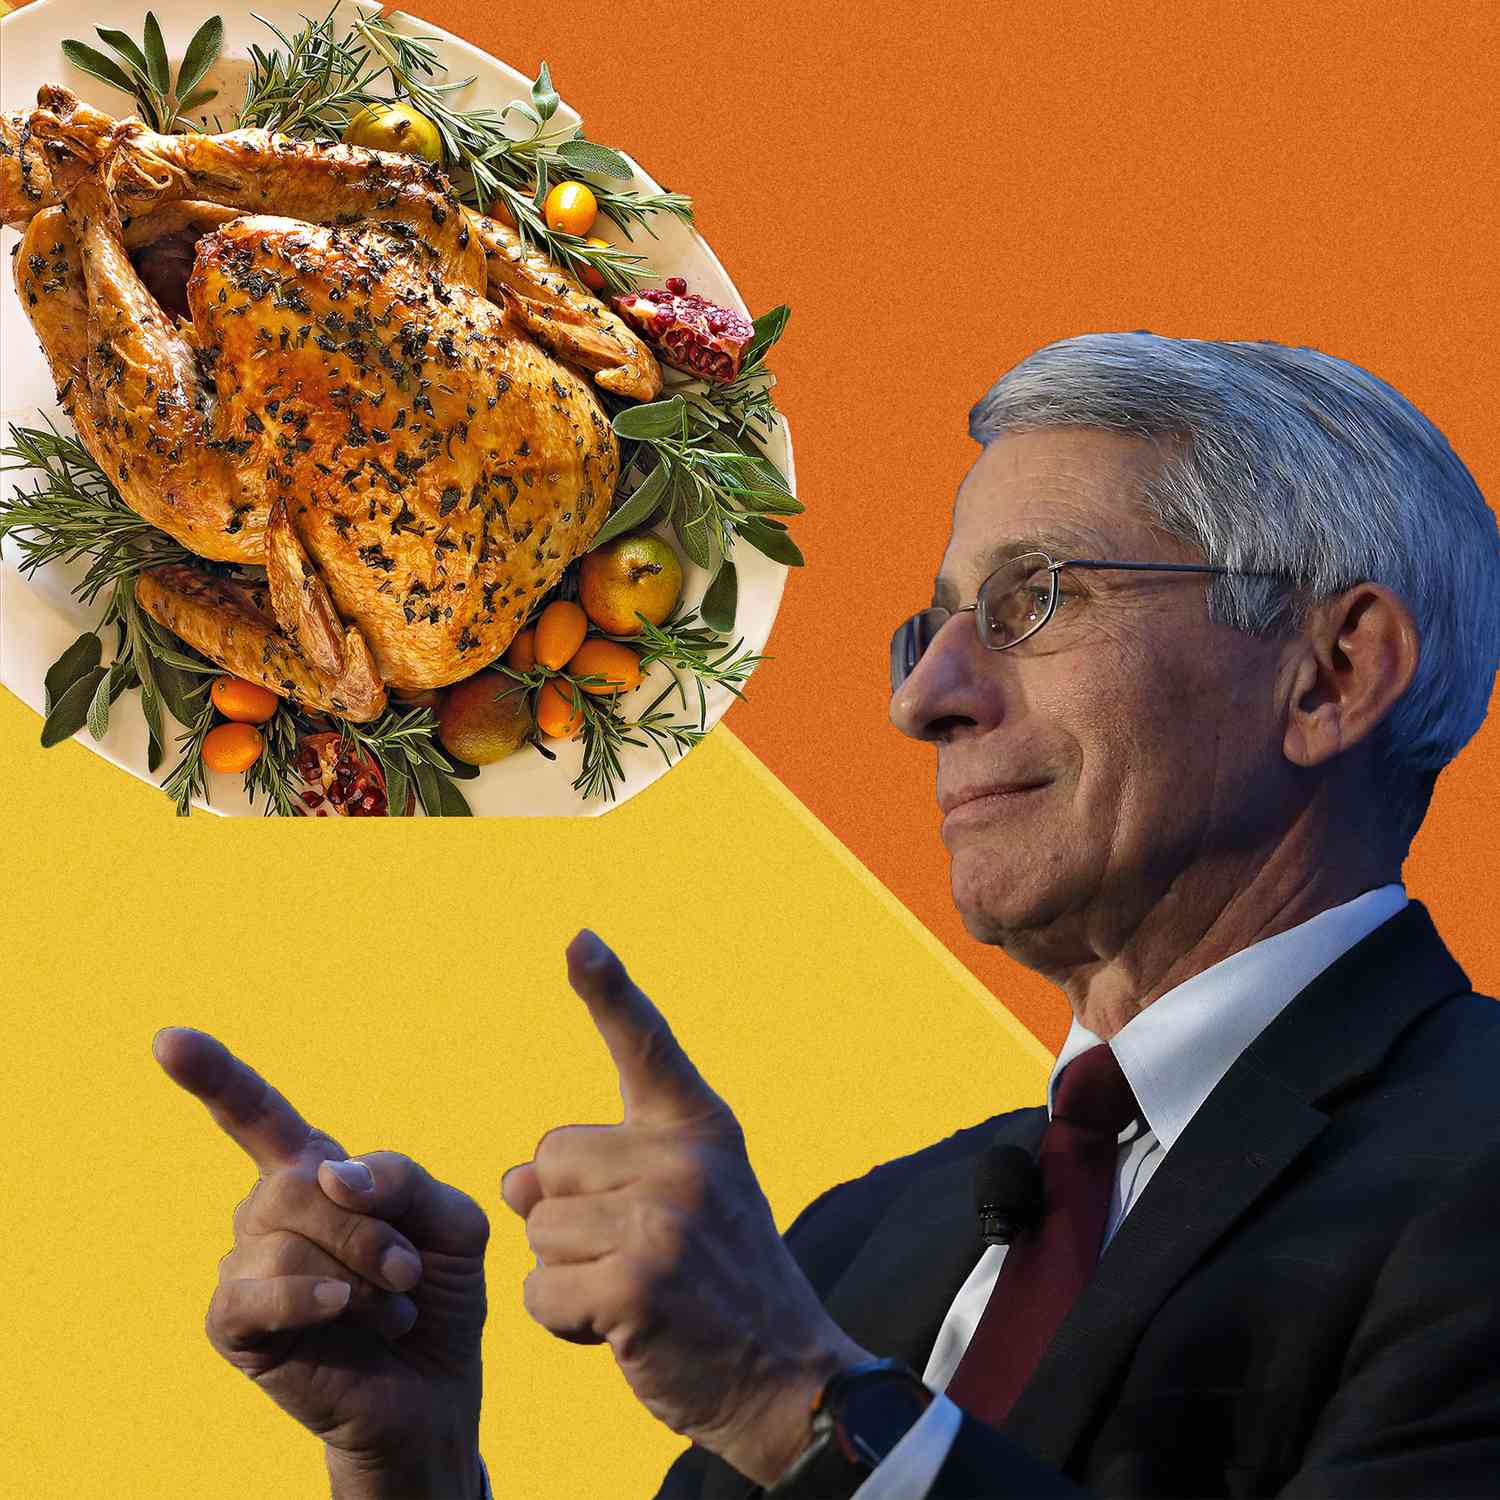 Here's How Dr. Fauci Plans to Celebrate Thanksgiving This Year